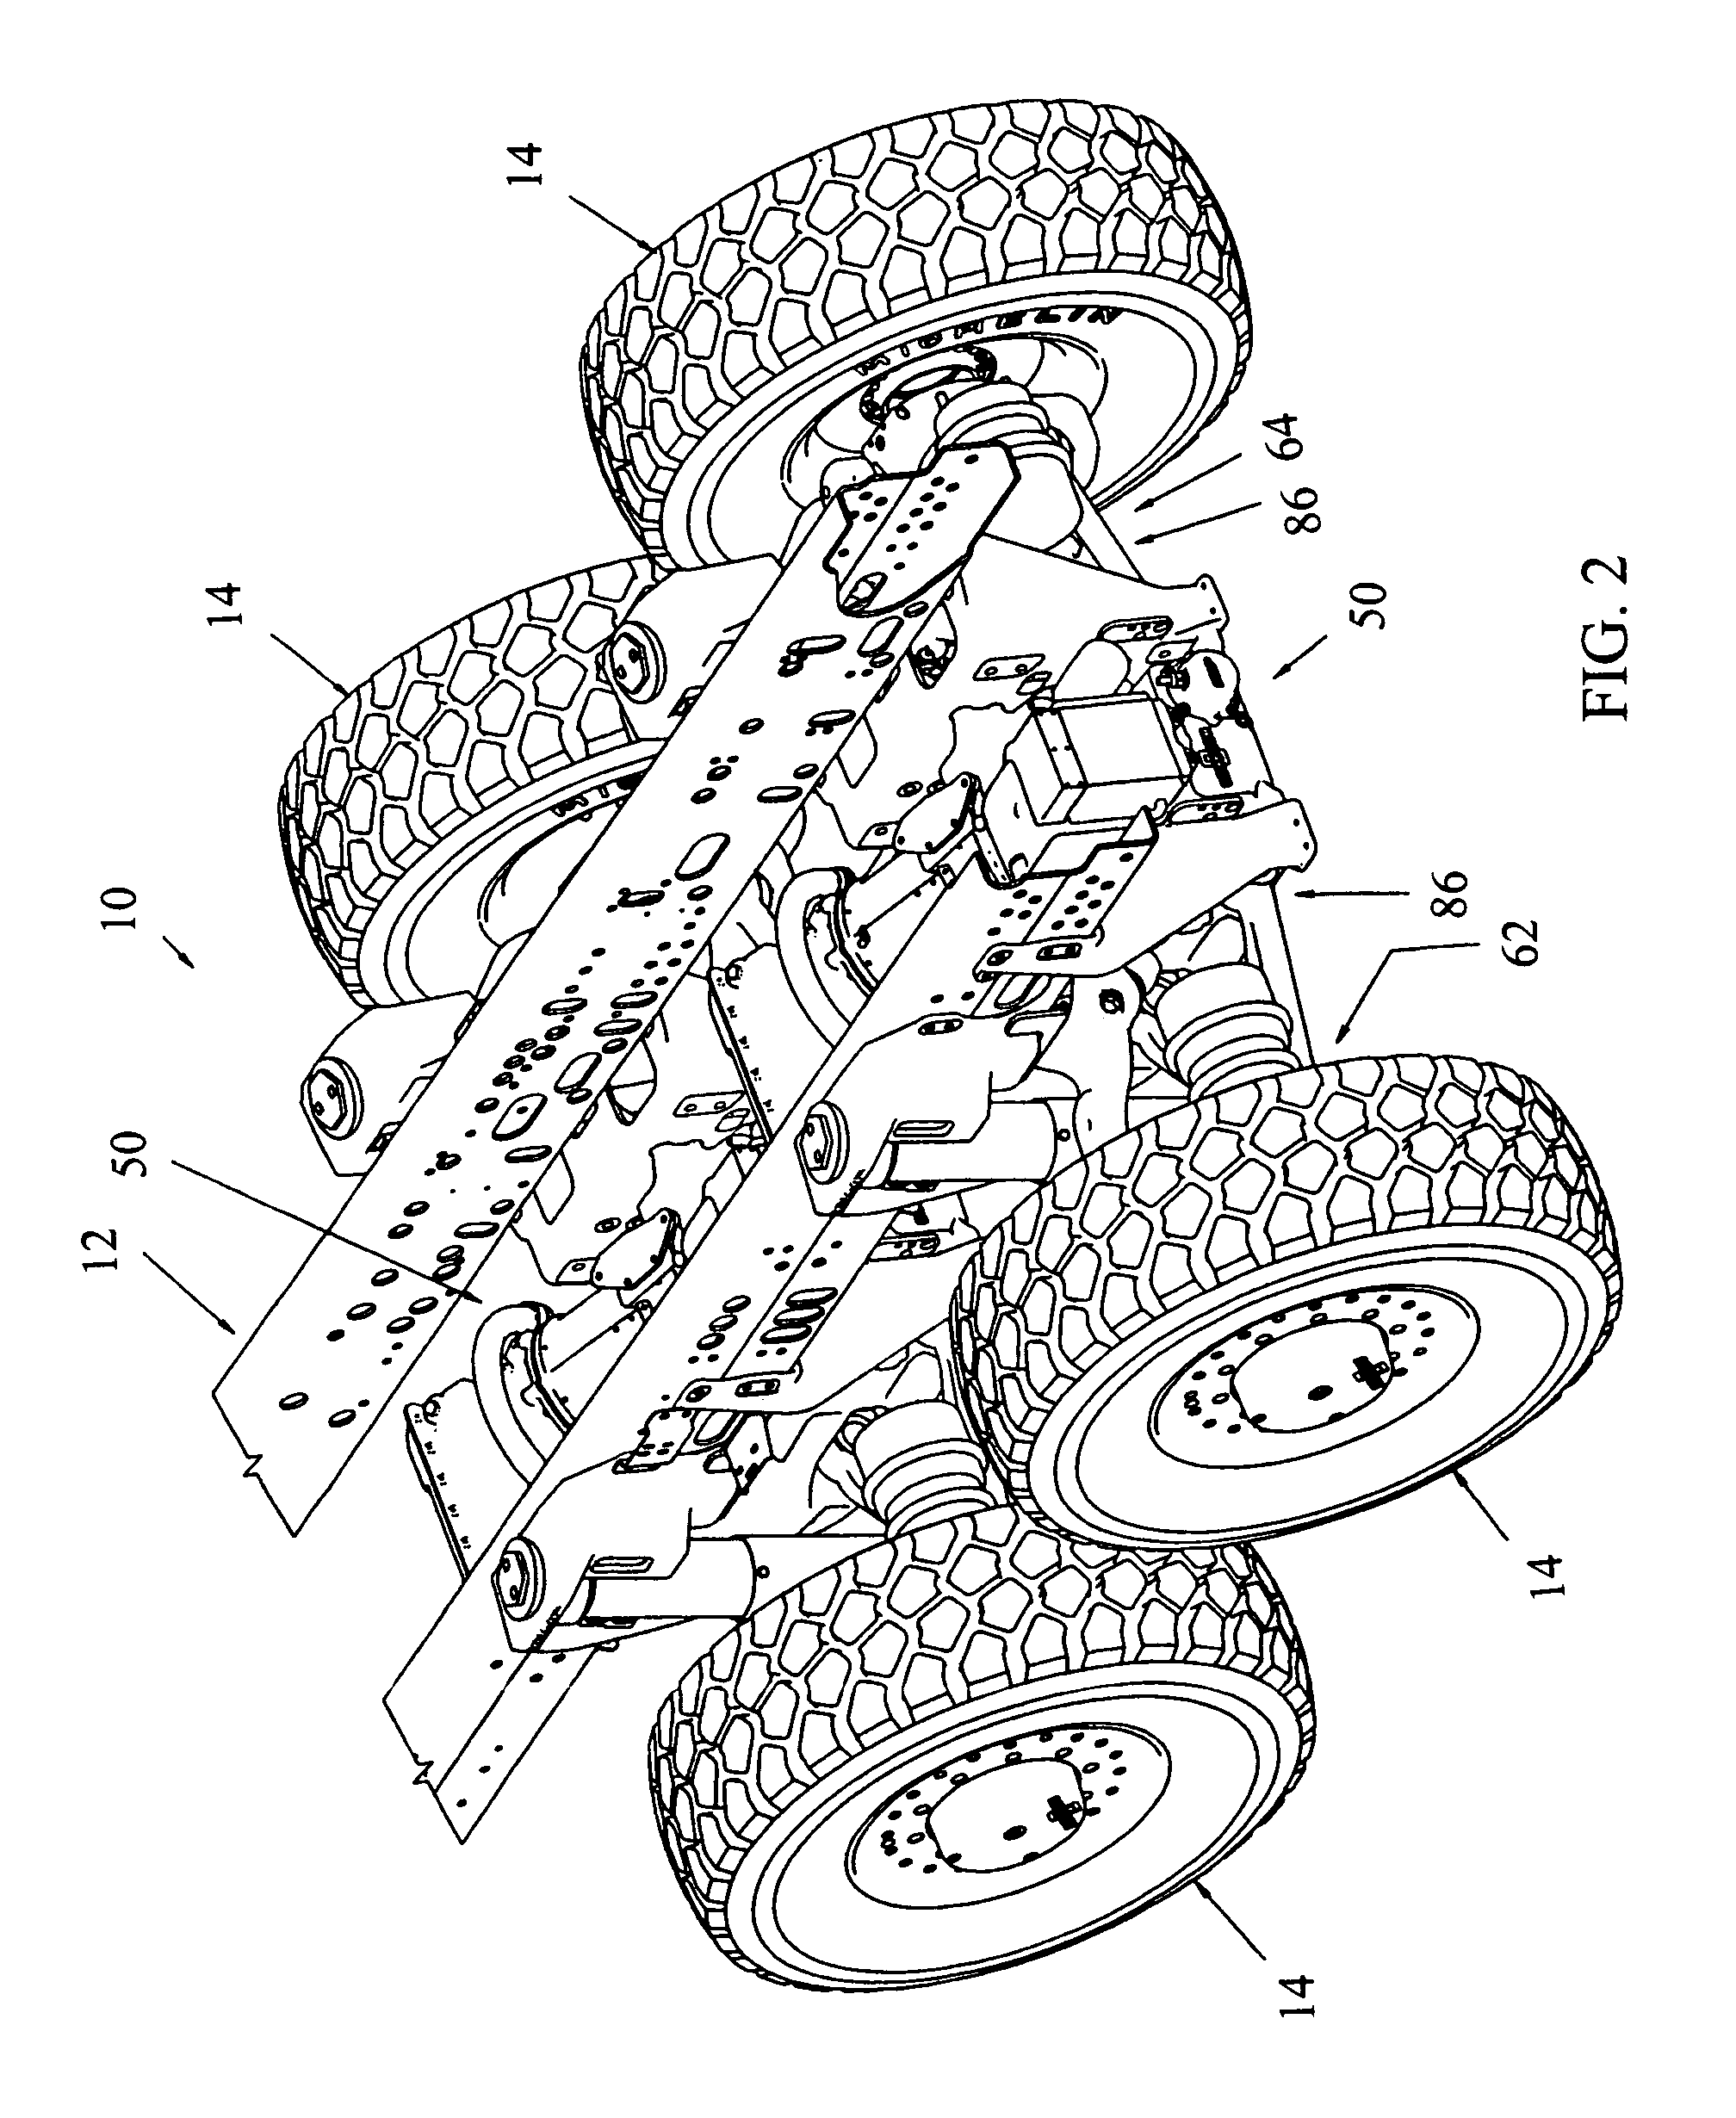 Self-contained axle module